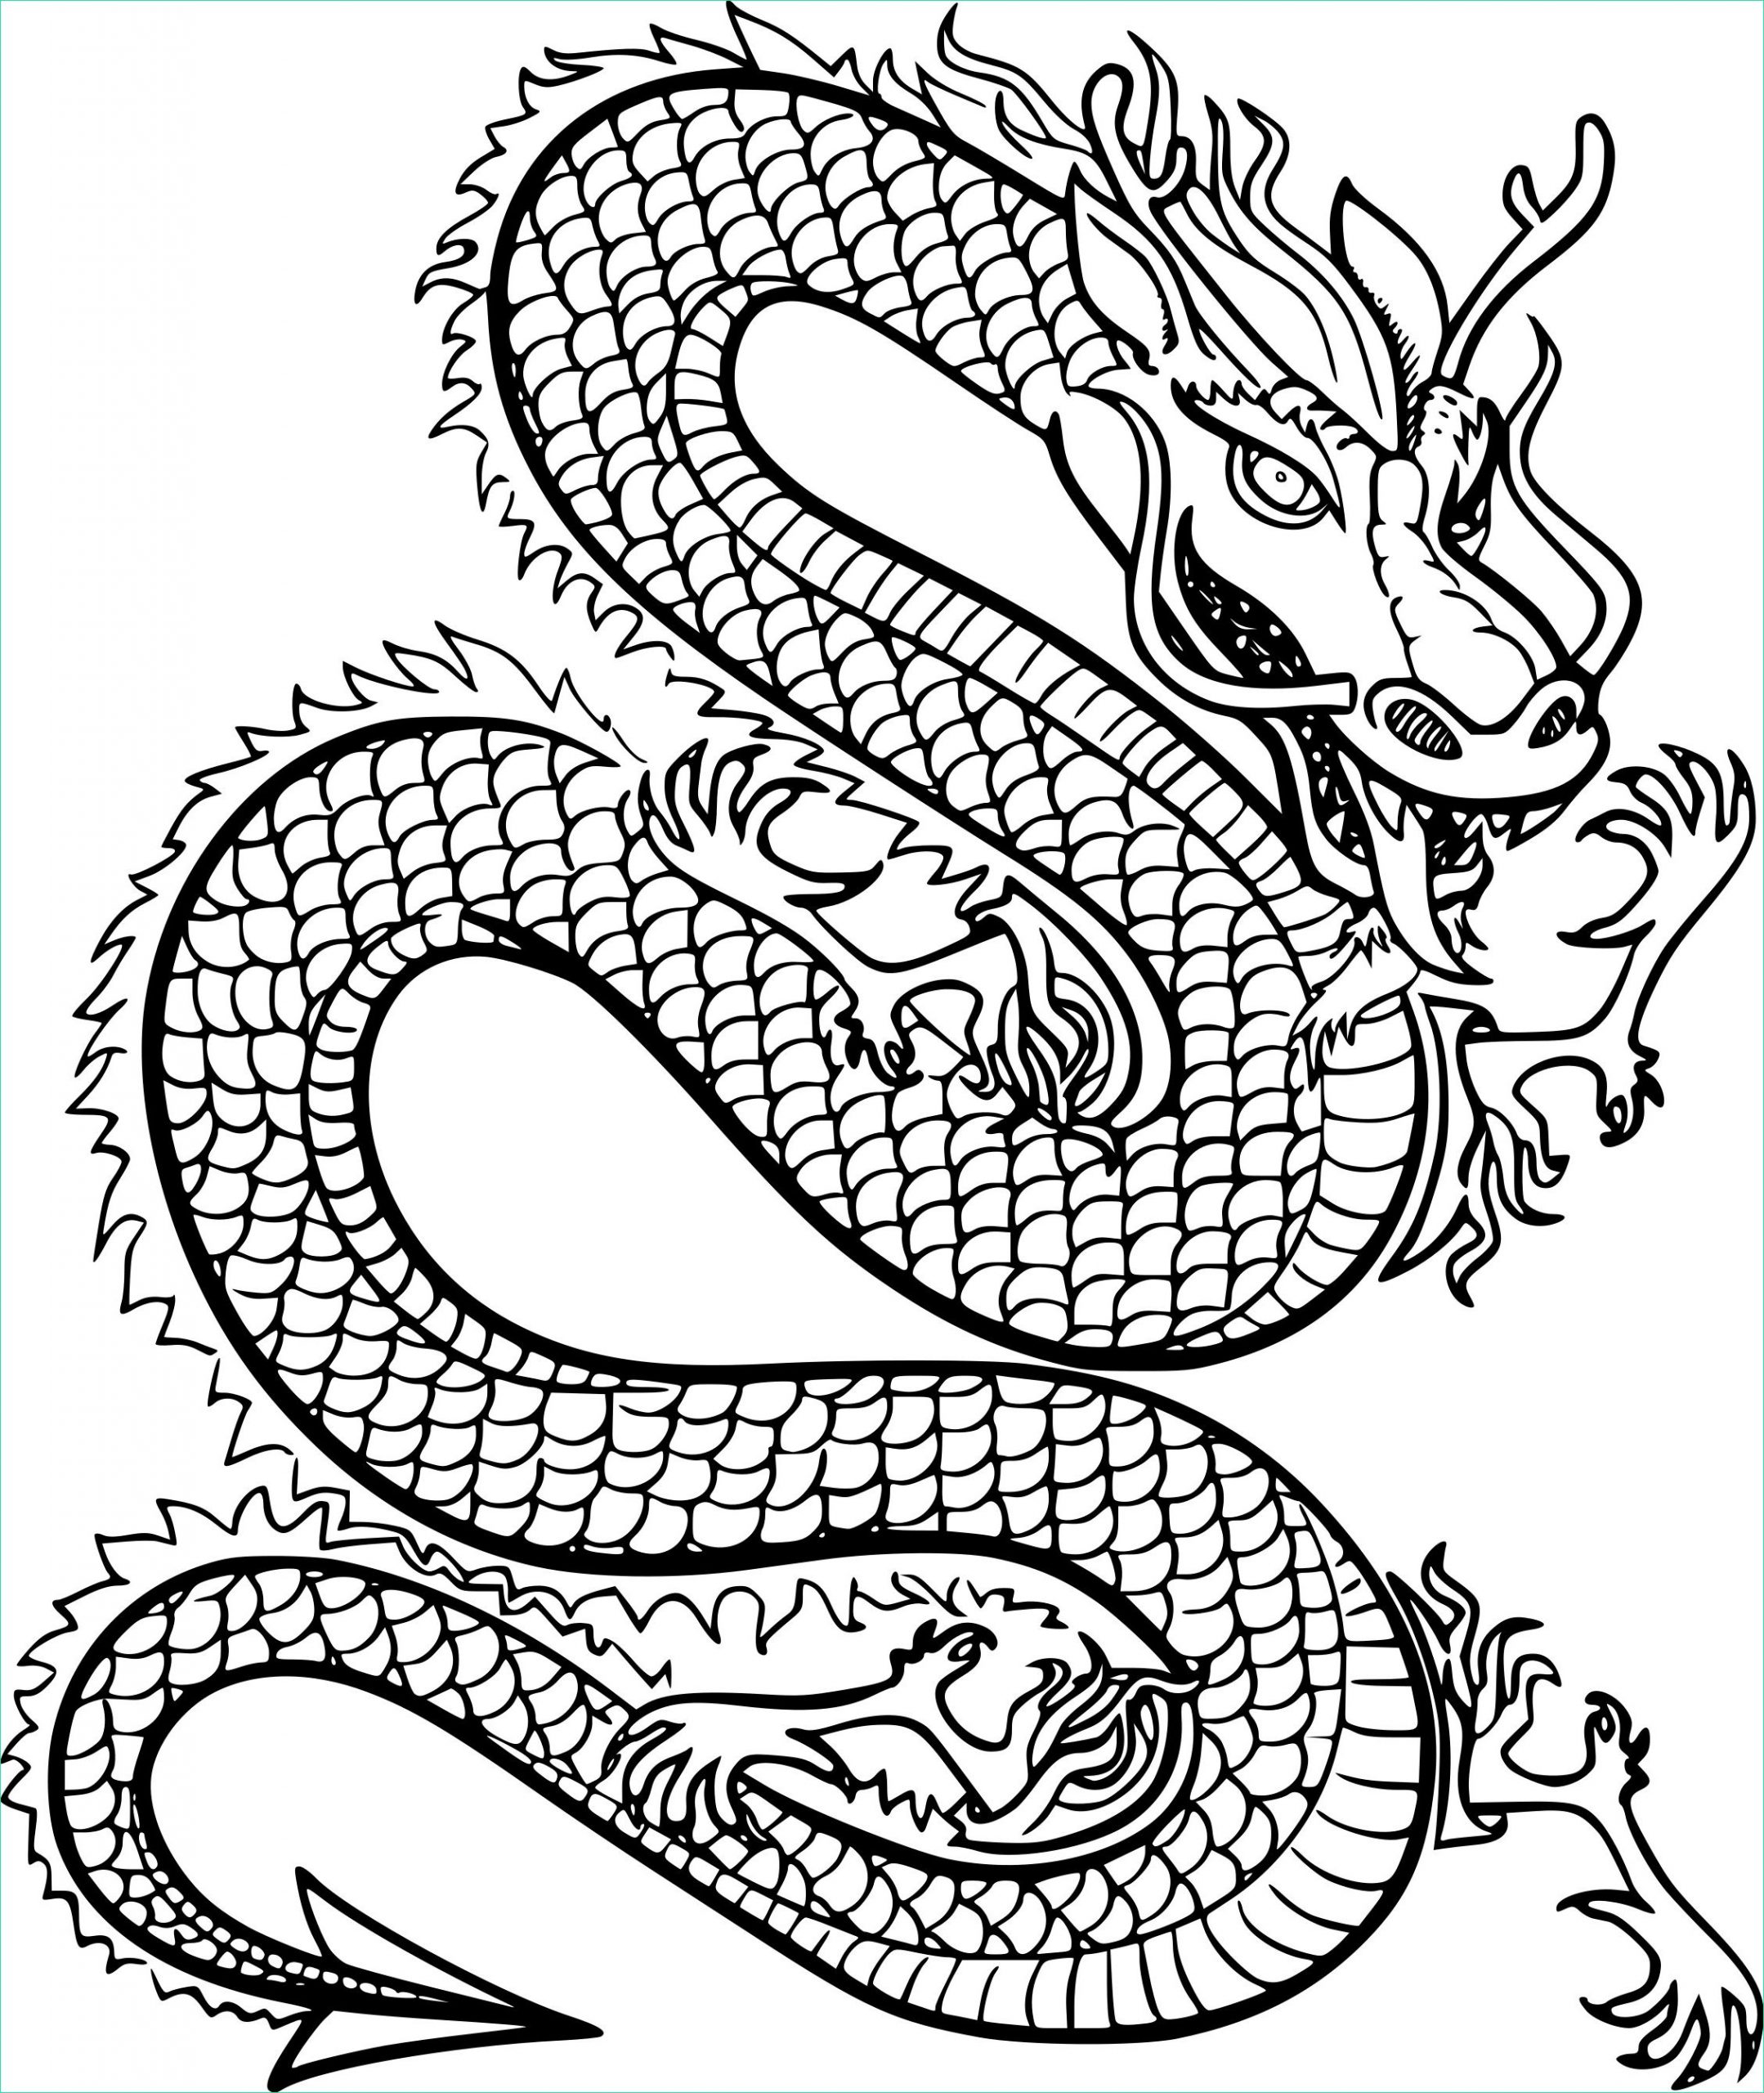 Dragon Chinois Coloriage Bestof Collection Coloriage Dragon Chinois à Imprimer Sur Coloriages Fo